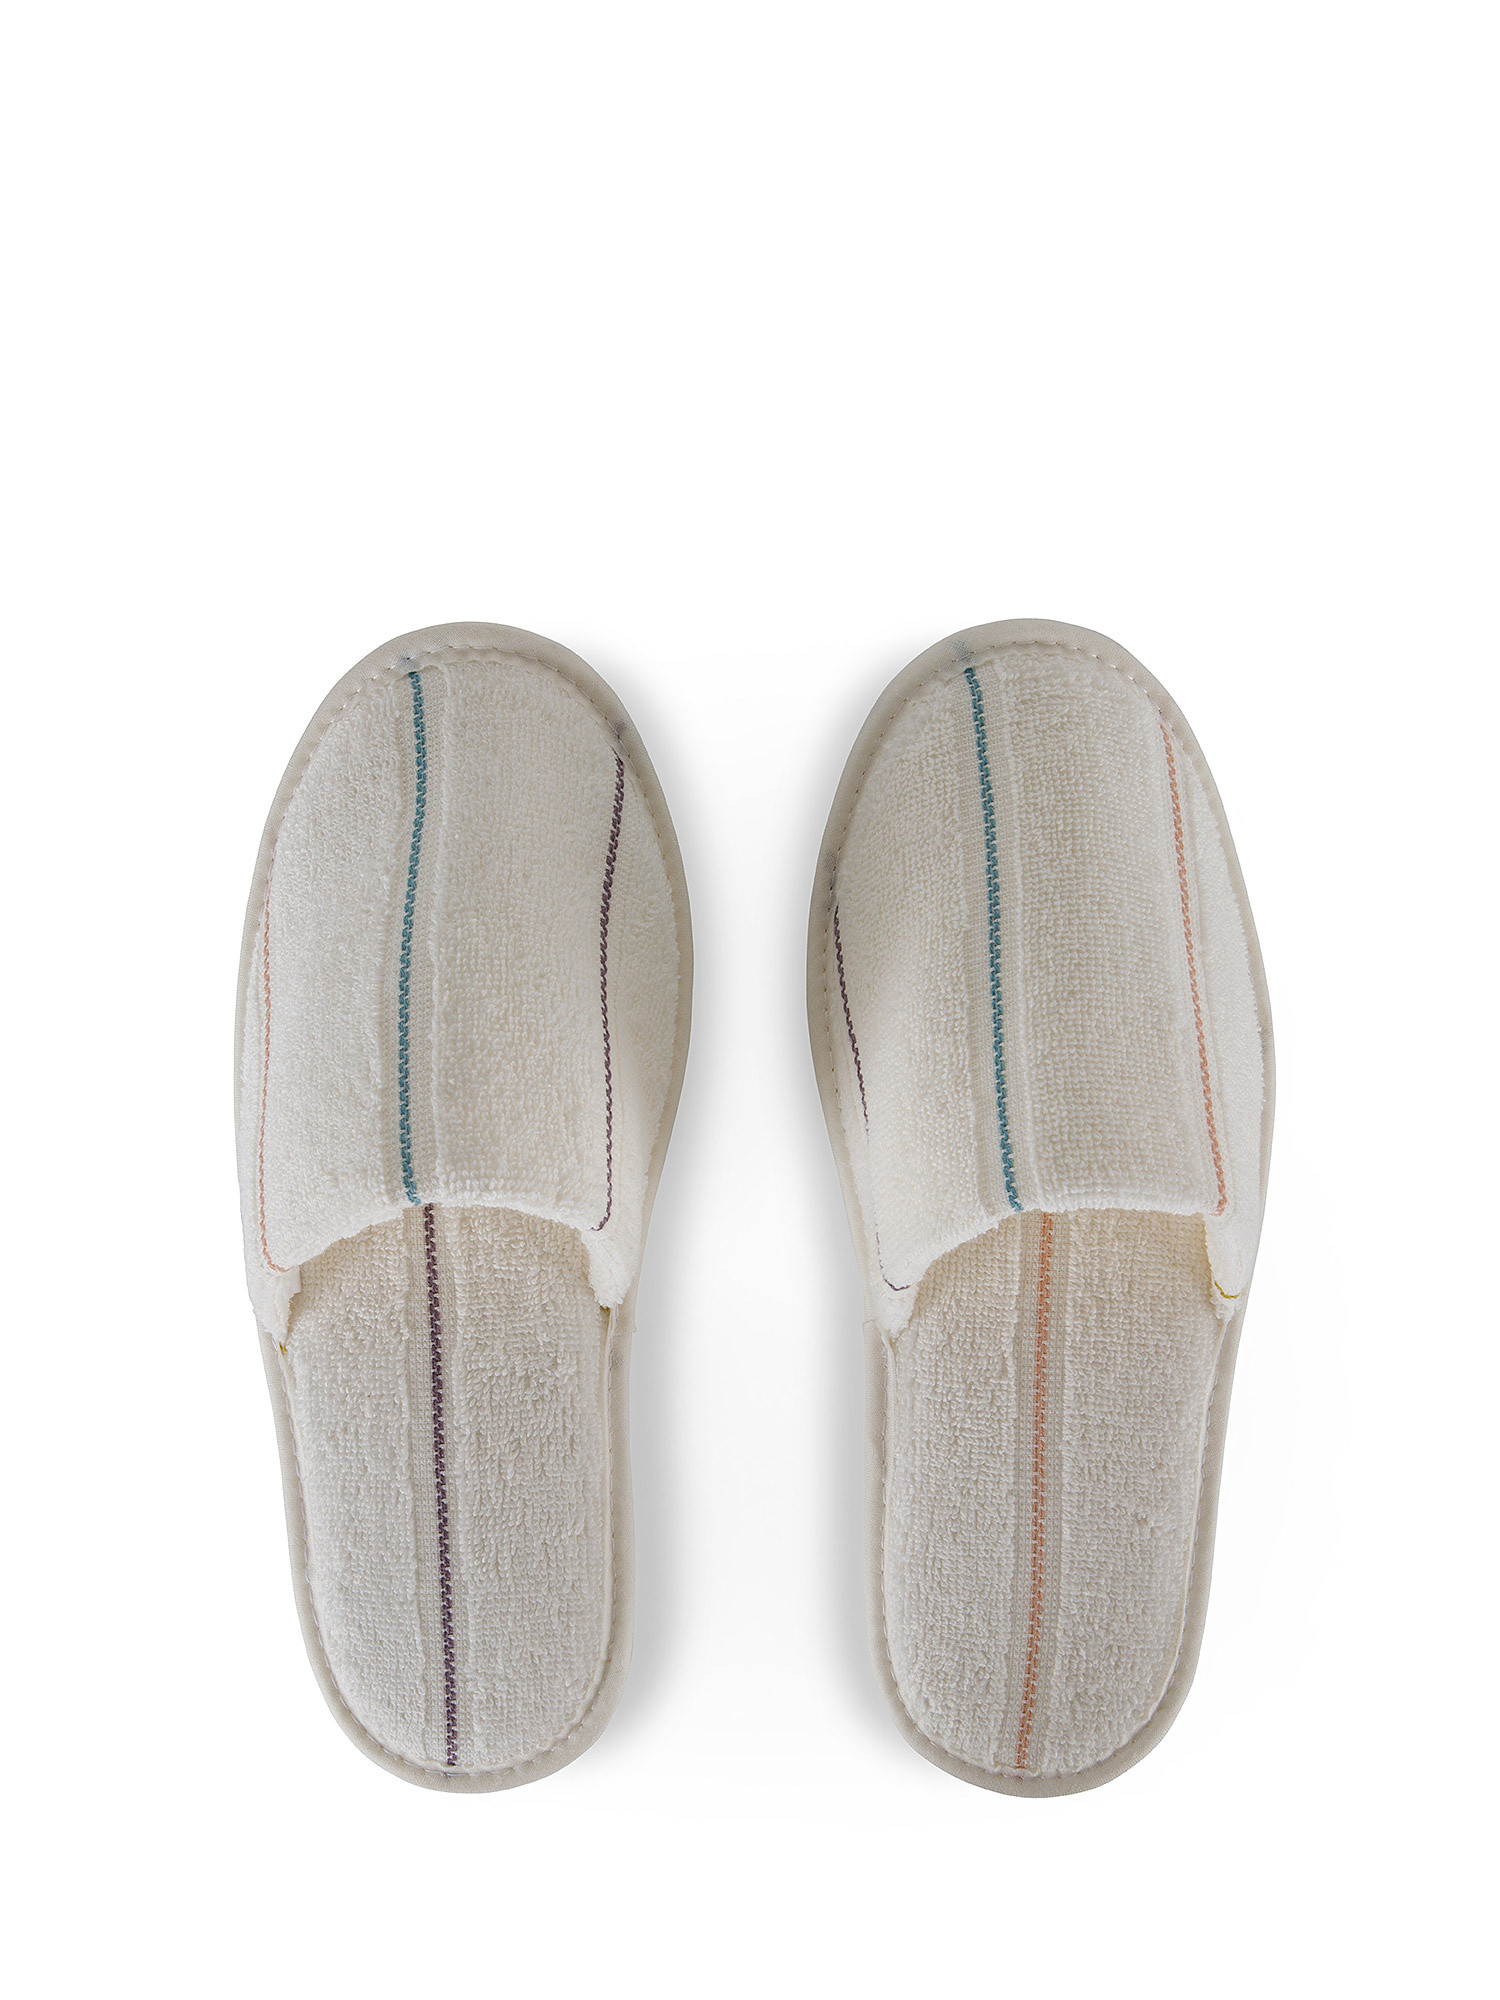 Terry cotton slippers with stitching, White, large image number 0